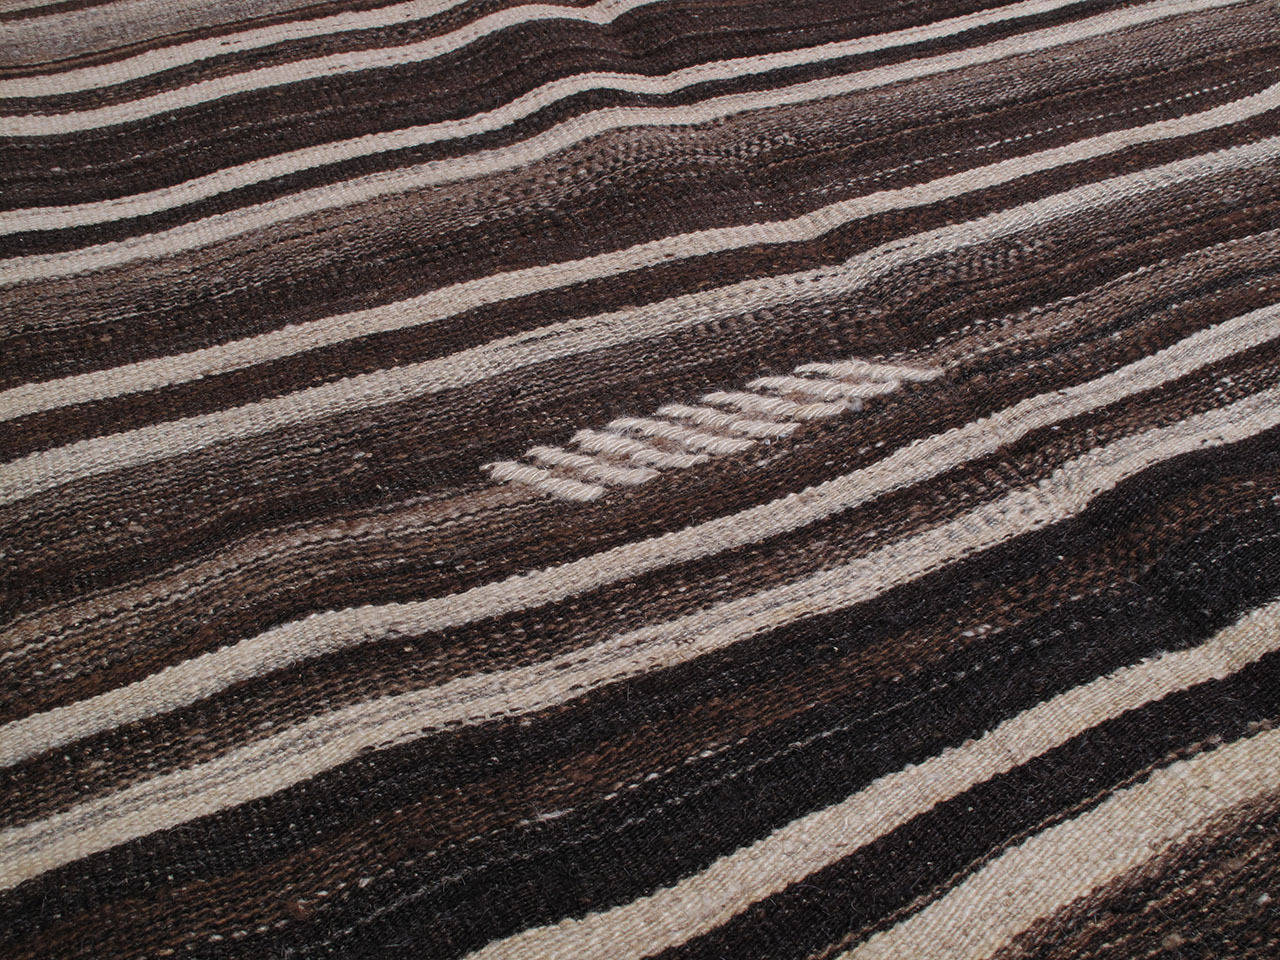 Hand-Woven Banded Kilim in Natural Brown